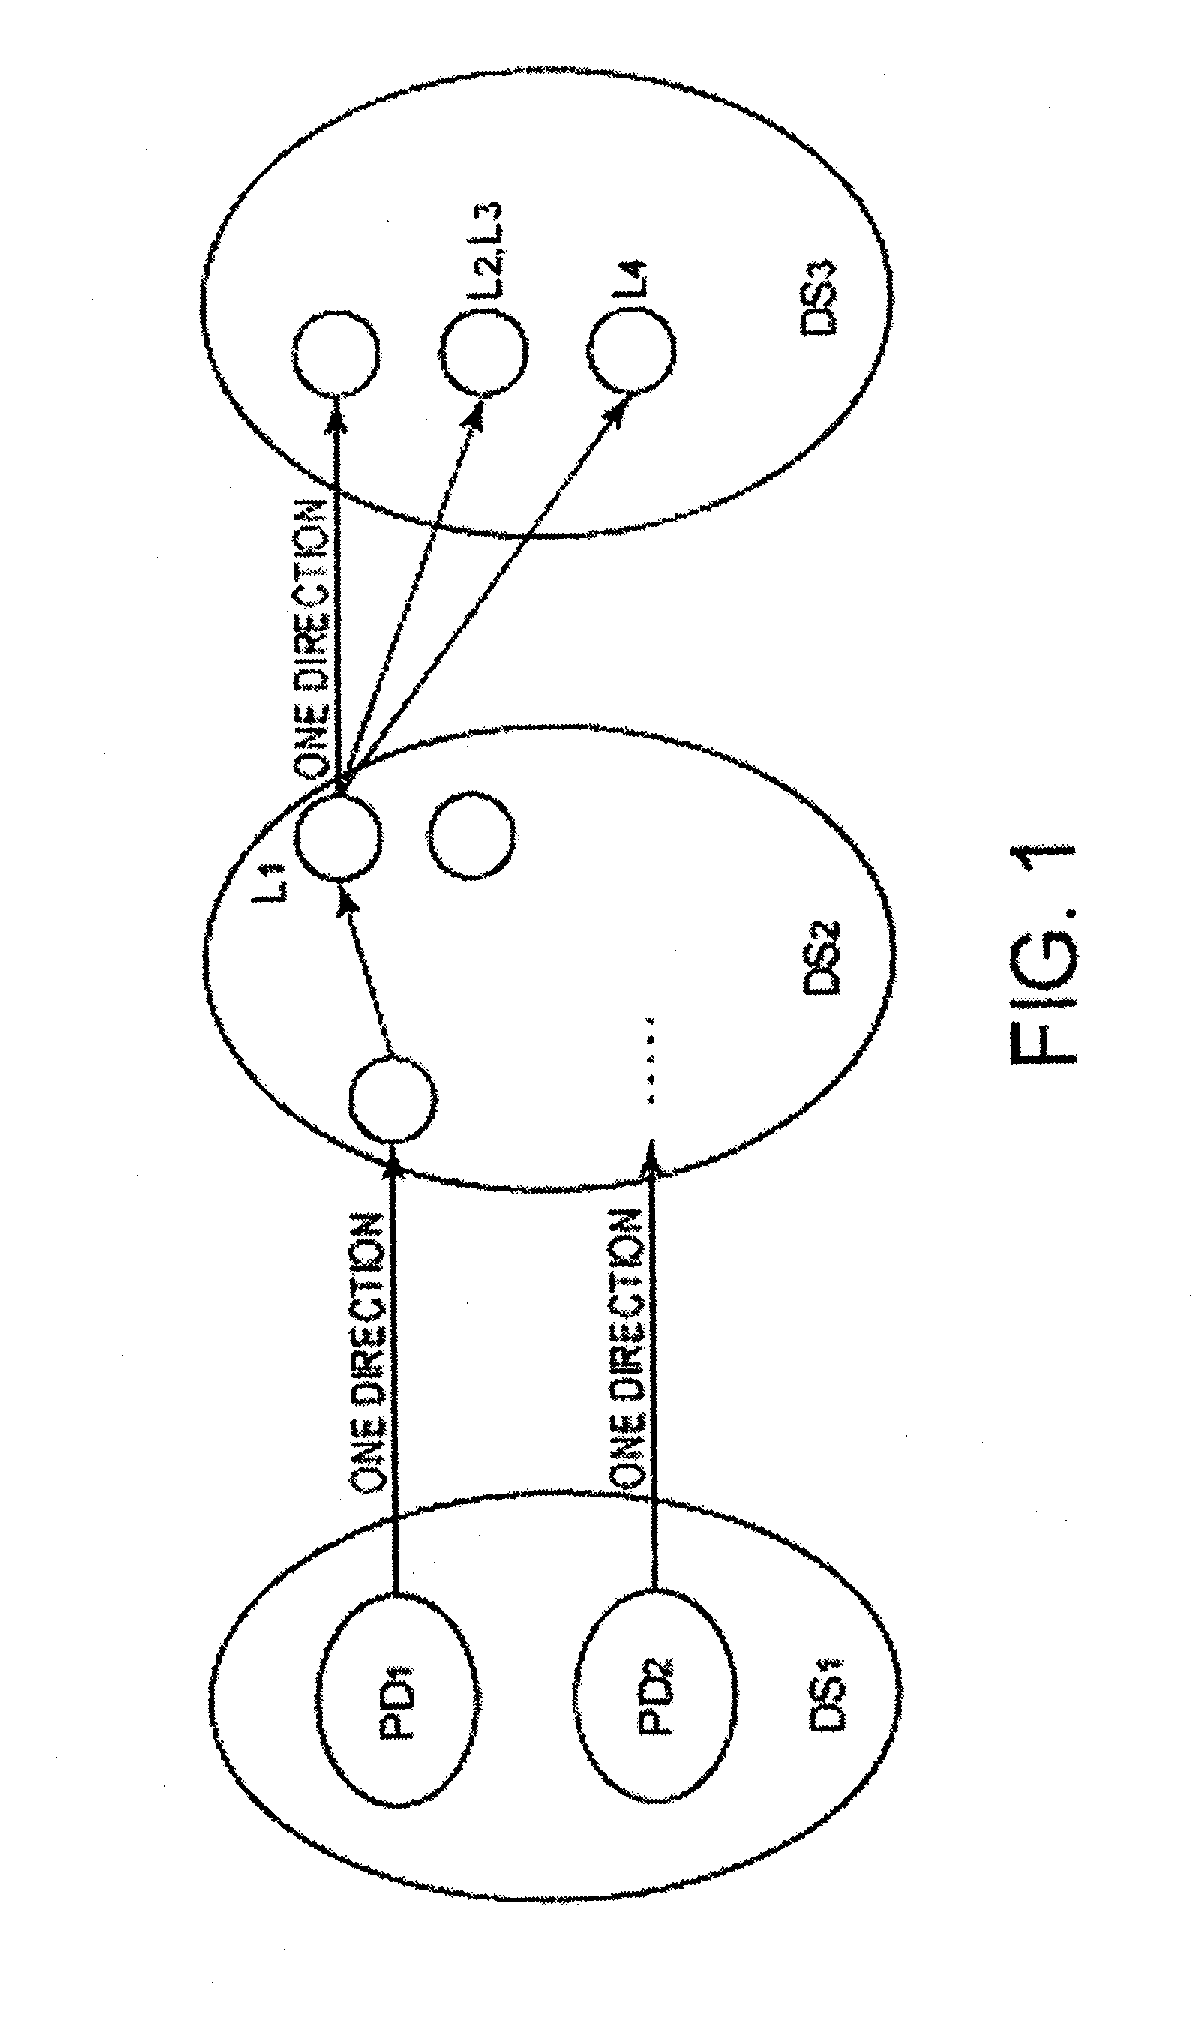 Method and system for obtaining a combination of faulty parts from a dispersed parts tree